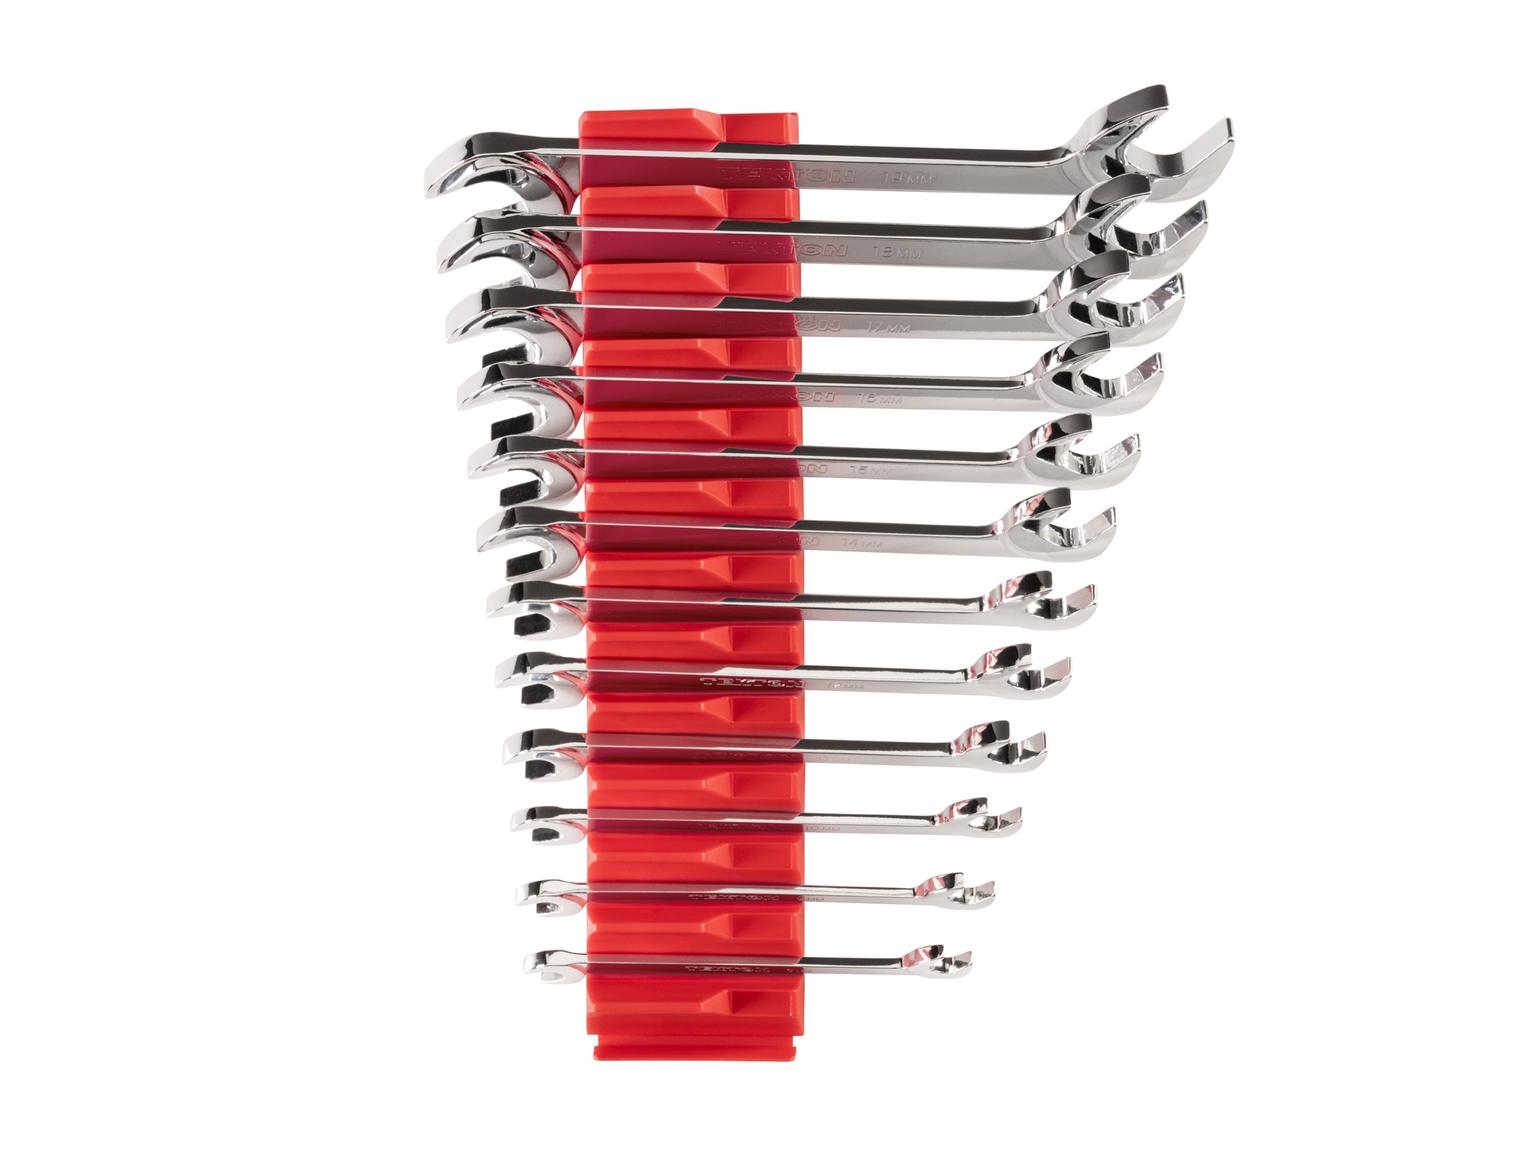 TEKTON WAE95201-T Angle Head Open End Wrench Set with Modular Slotted Organizer, 12-Piece (8 - 19 mm)